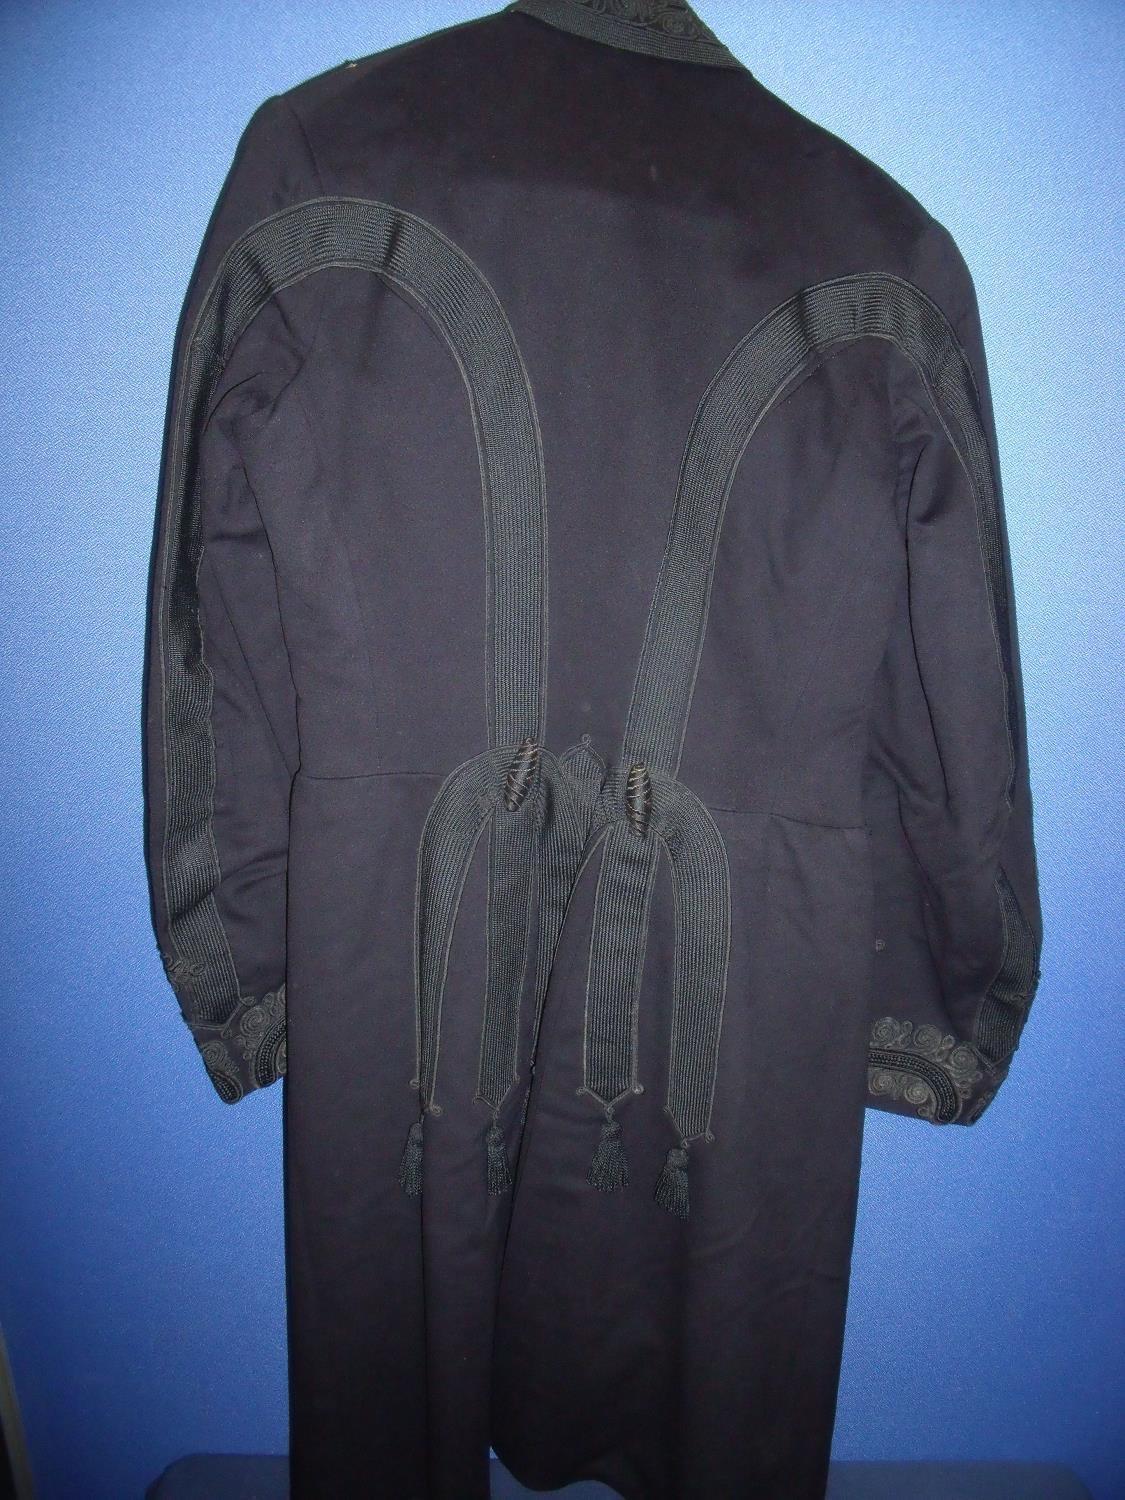 Victorian 2nd Lieutenants full length frock coat dress uniform with lined interior and internal - Image 2 of 2